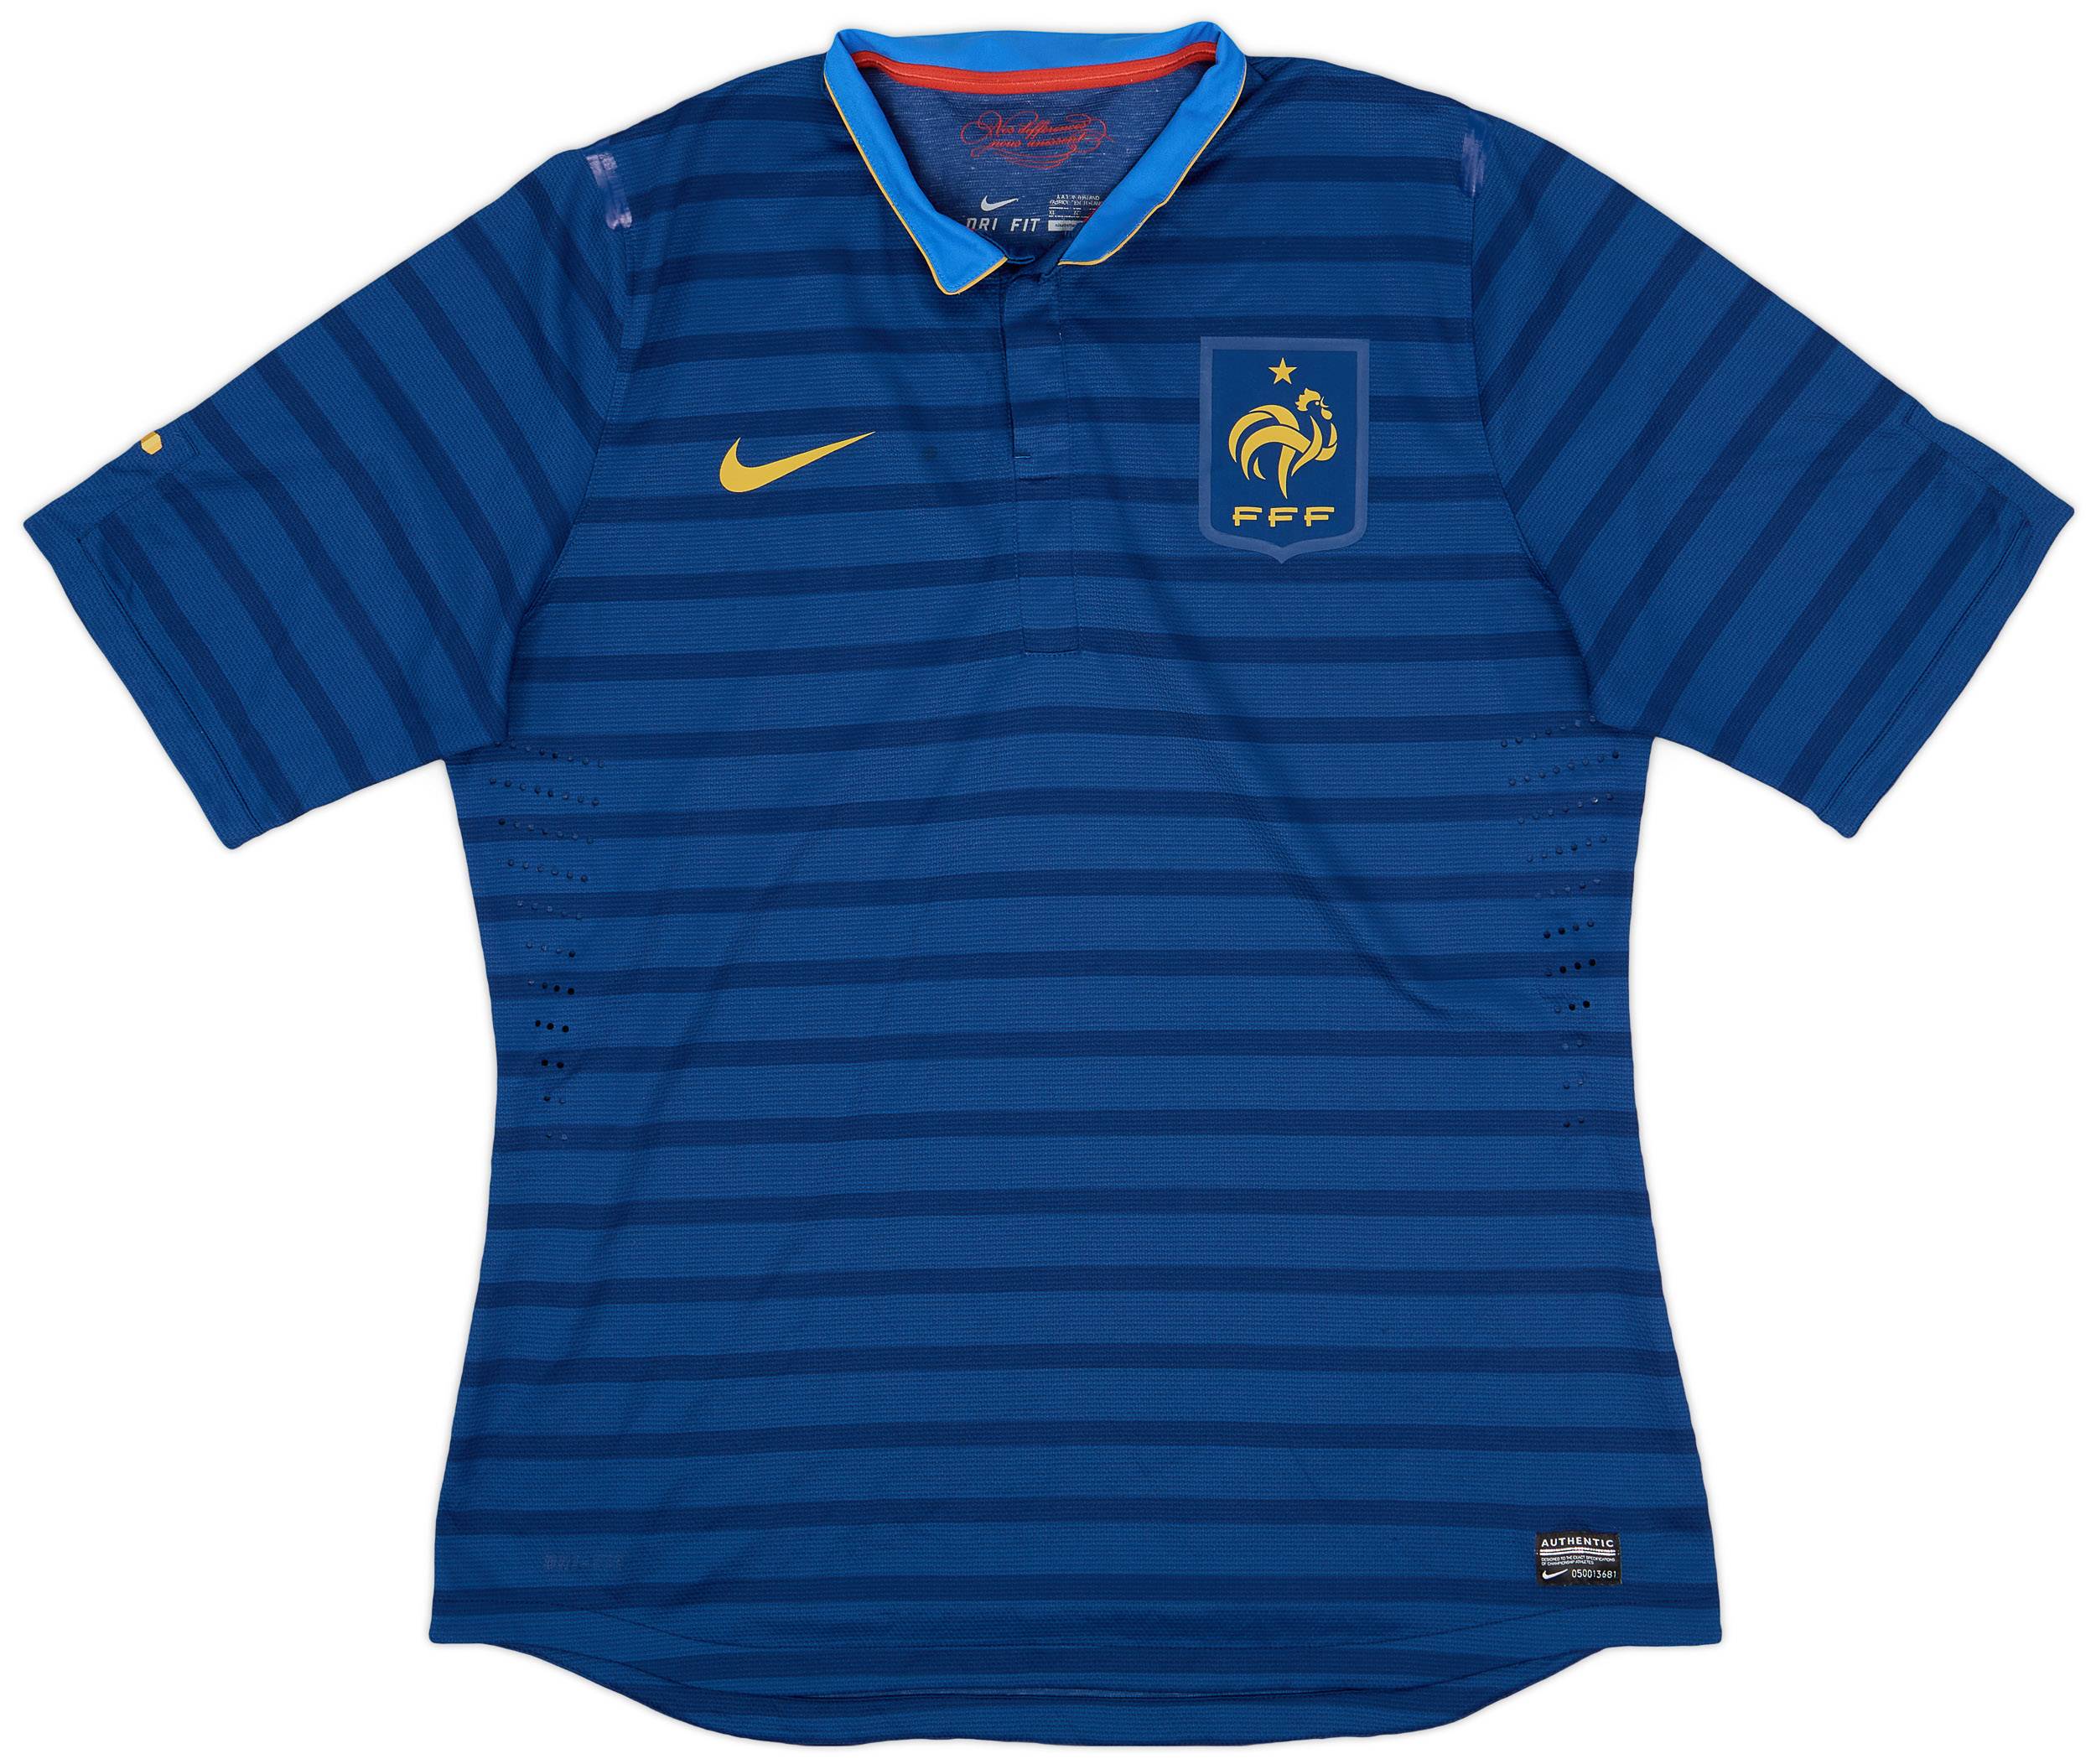 2012-13 France Player Issue Home Shirt - 8/10 - (XL)